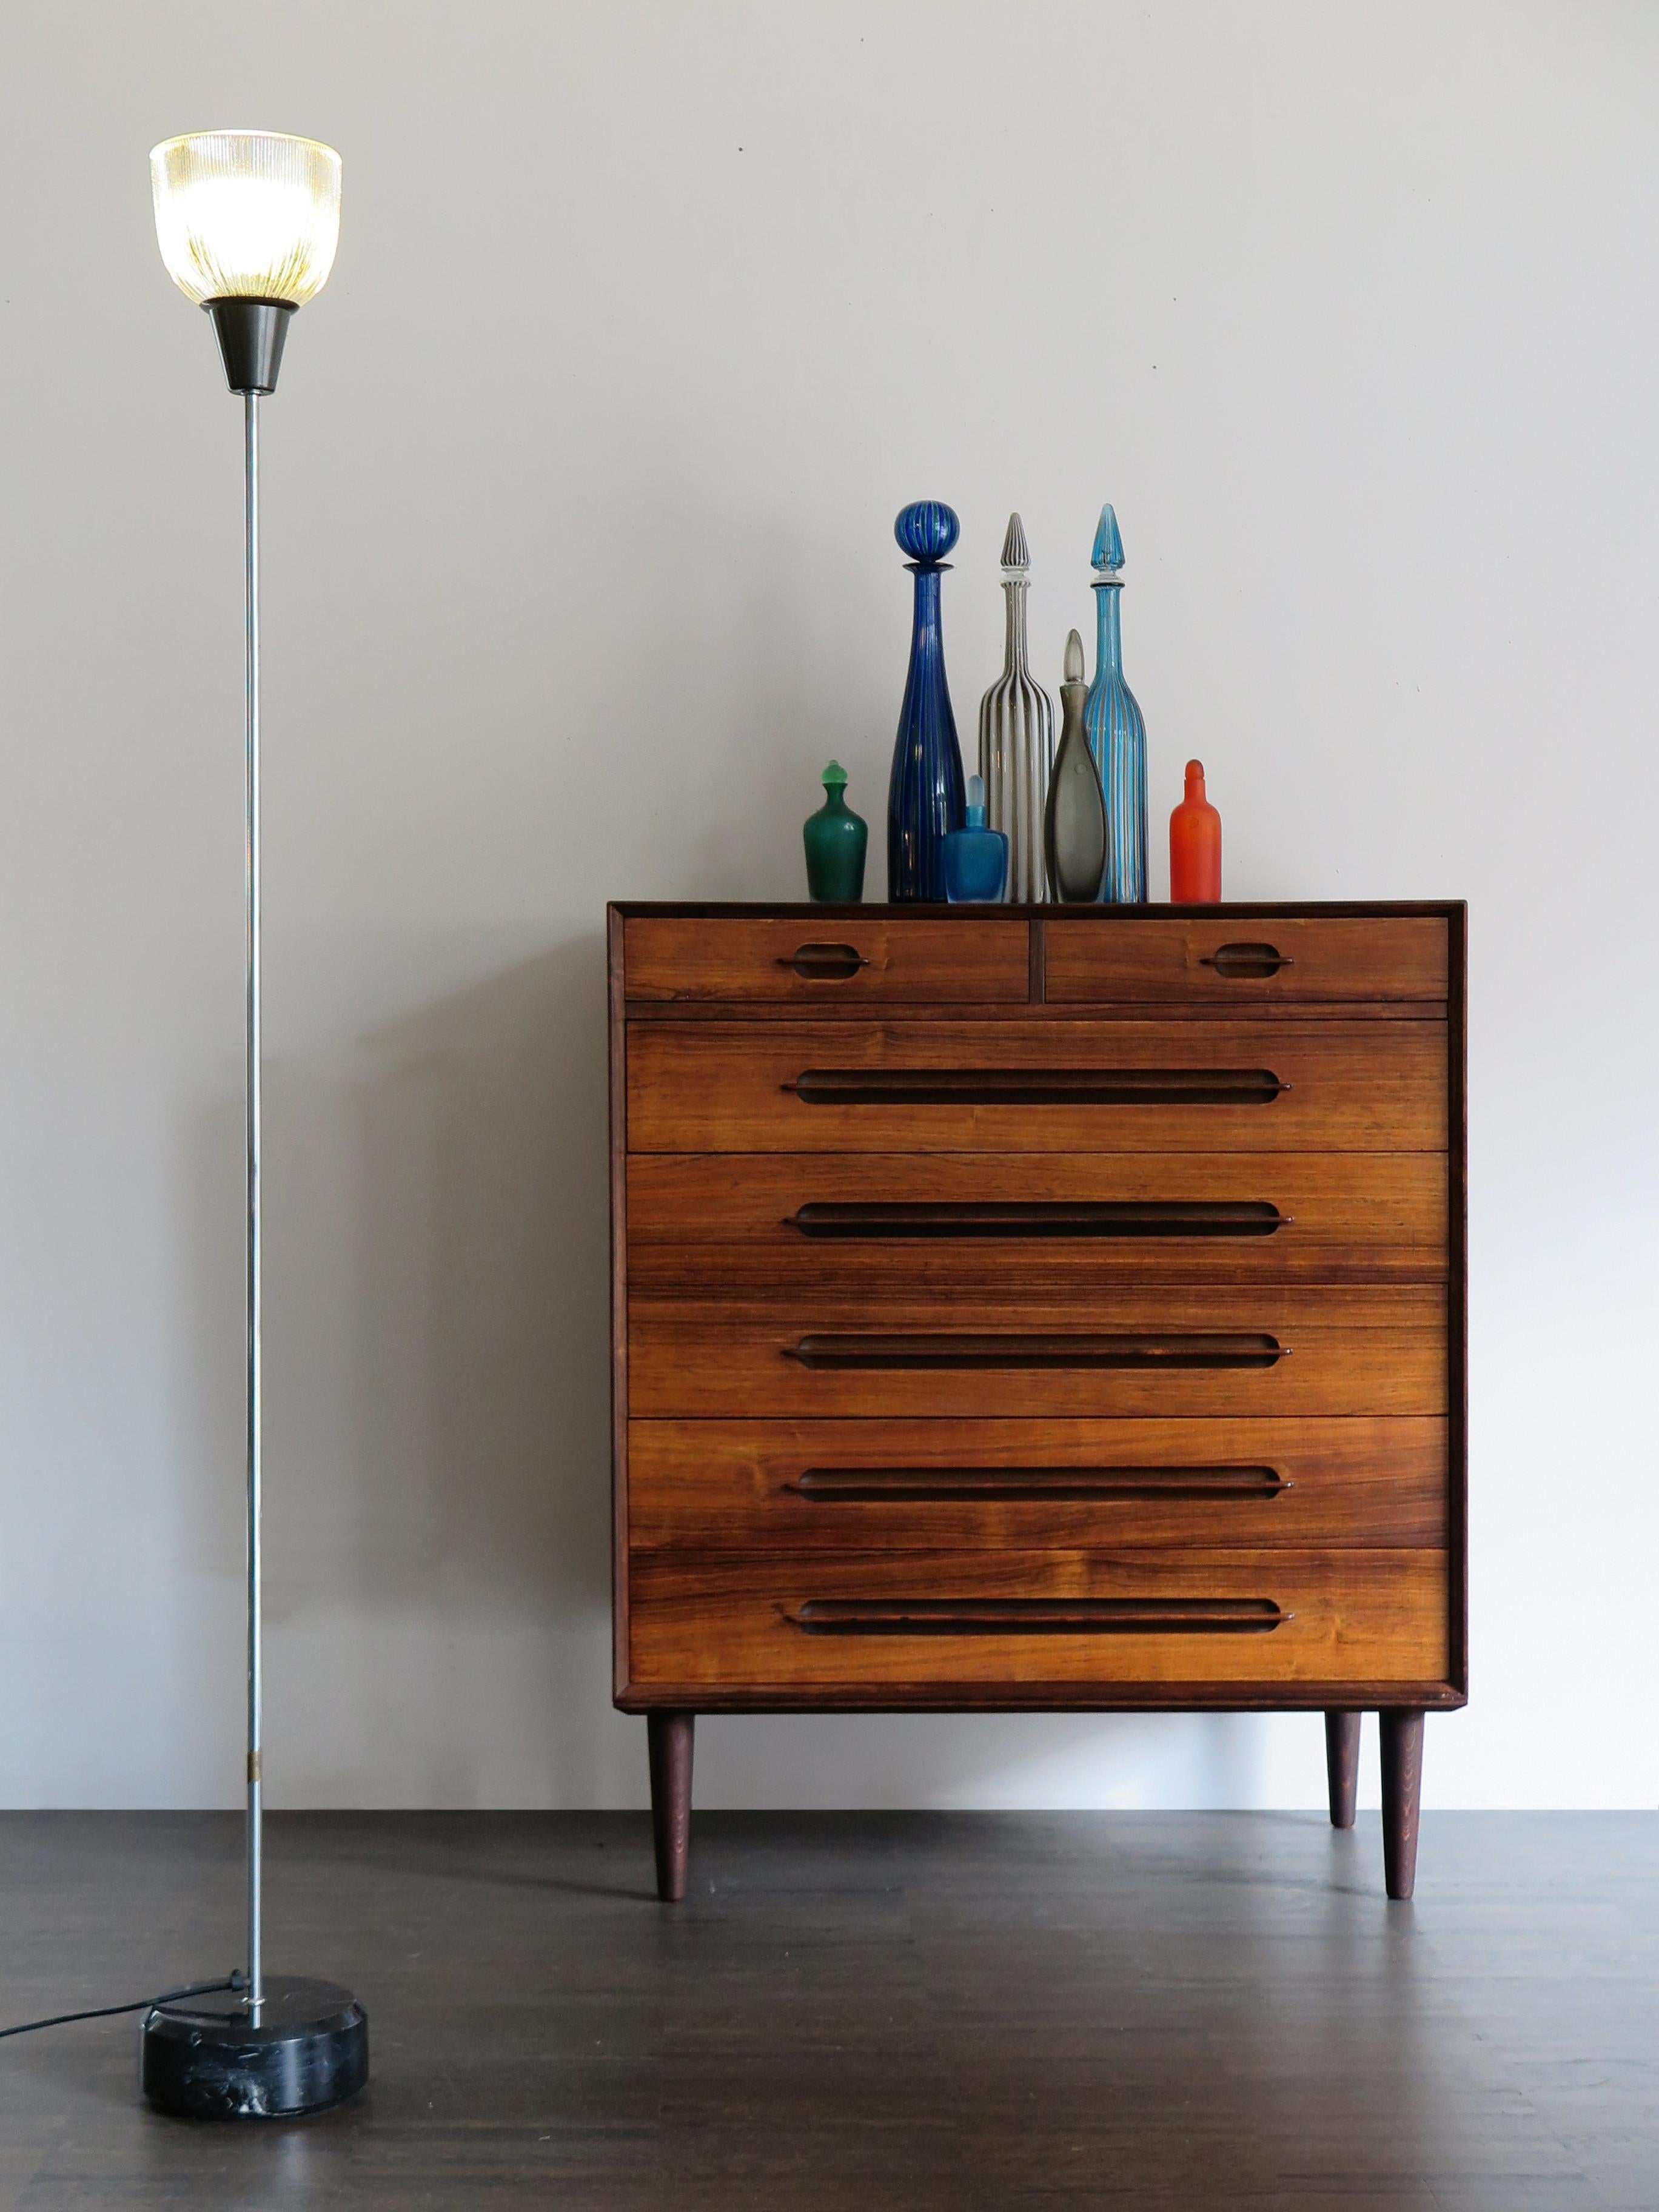 Scandinavian dark wood chest of drawers designed by Danish artist Ejvind A. Johansson for Gern Møbelfabrik, circa 1960.

Please note that the item is original of the period and this shows normal signs of age and use.